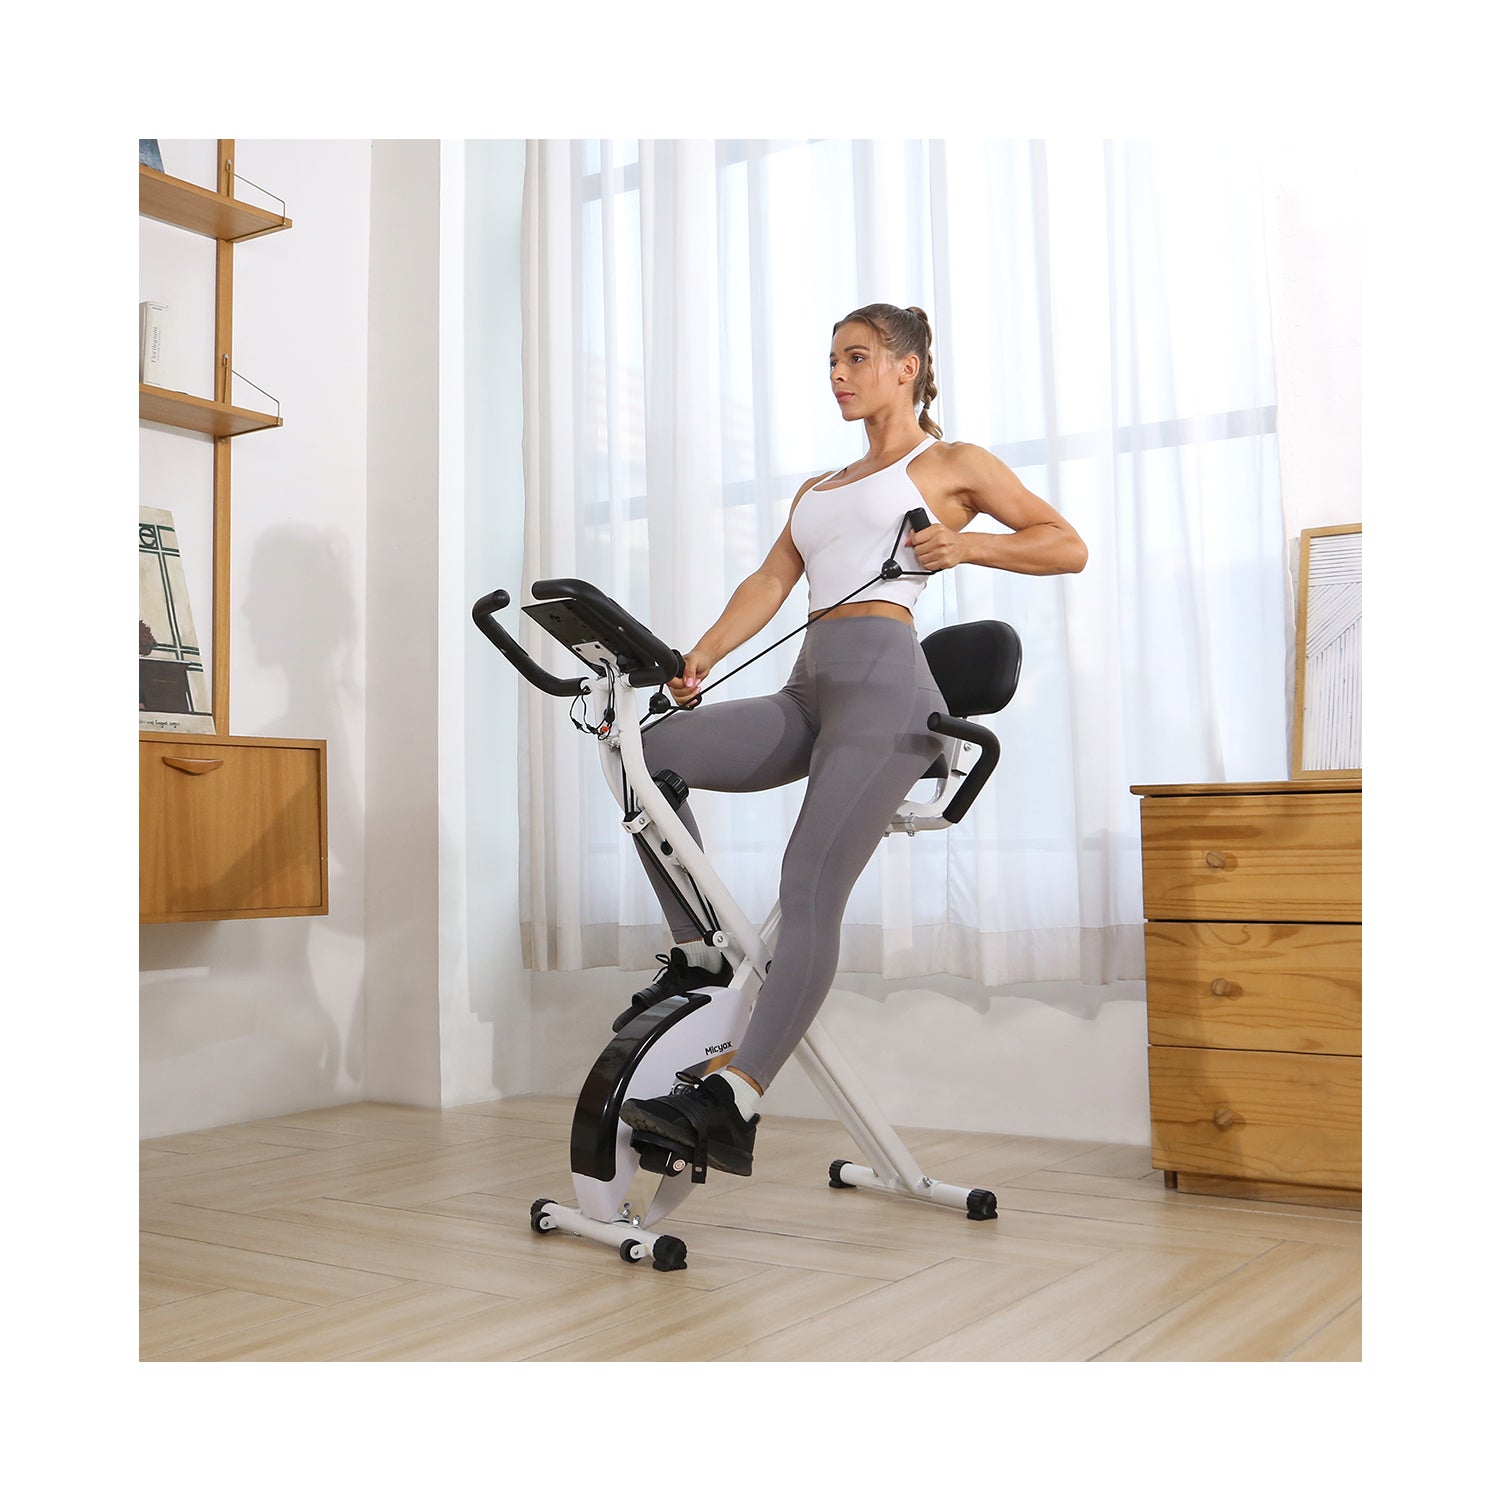 Micyox Folding Exercise Bike For Home